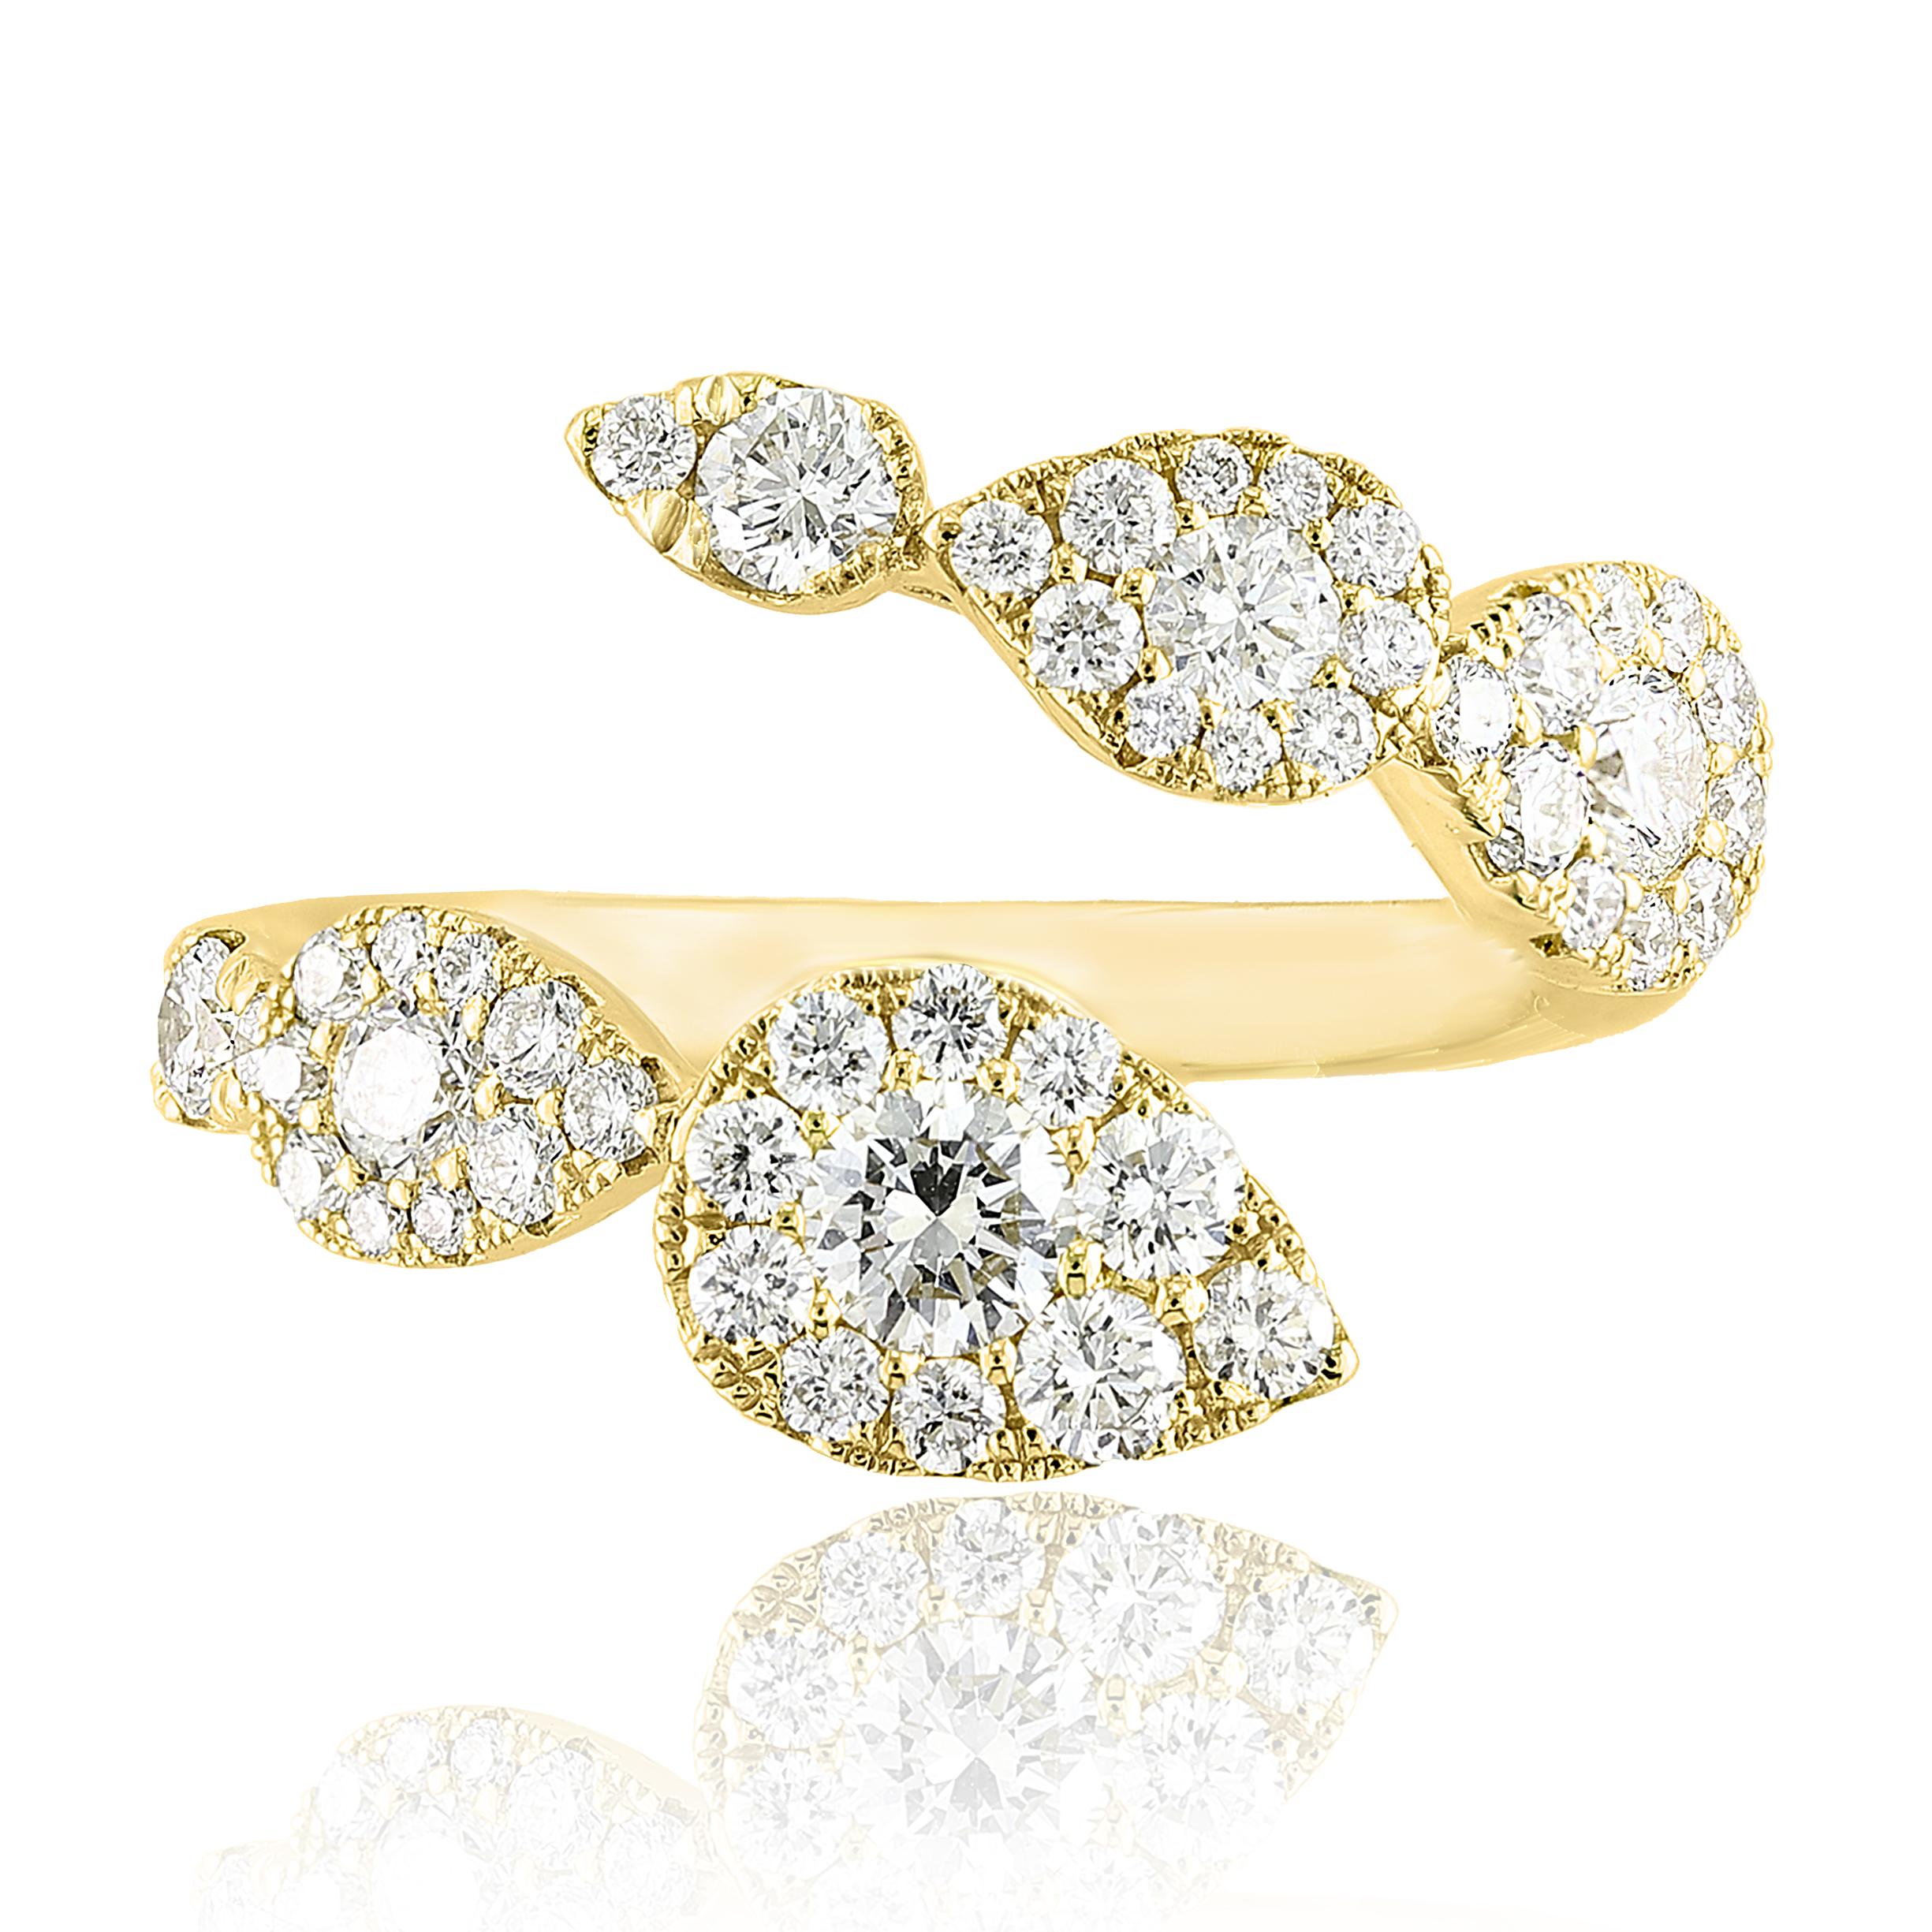 The stunning forever-together Toi et Moi ring features Brilliant cut Diamonds embraced by east to west halfway to the shank. Handcrafted in 18k Yellow Gold.
48 Brilliant Cut Diamonds weigh 1.15 carats on both sides.
A classic Ring full of luster and